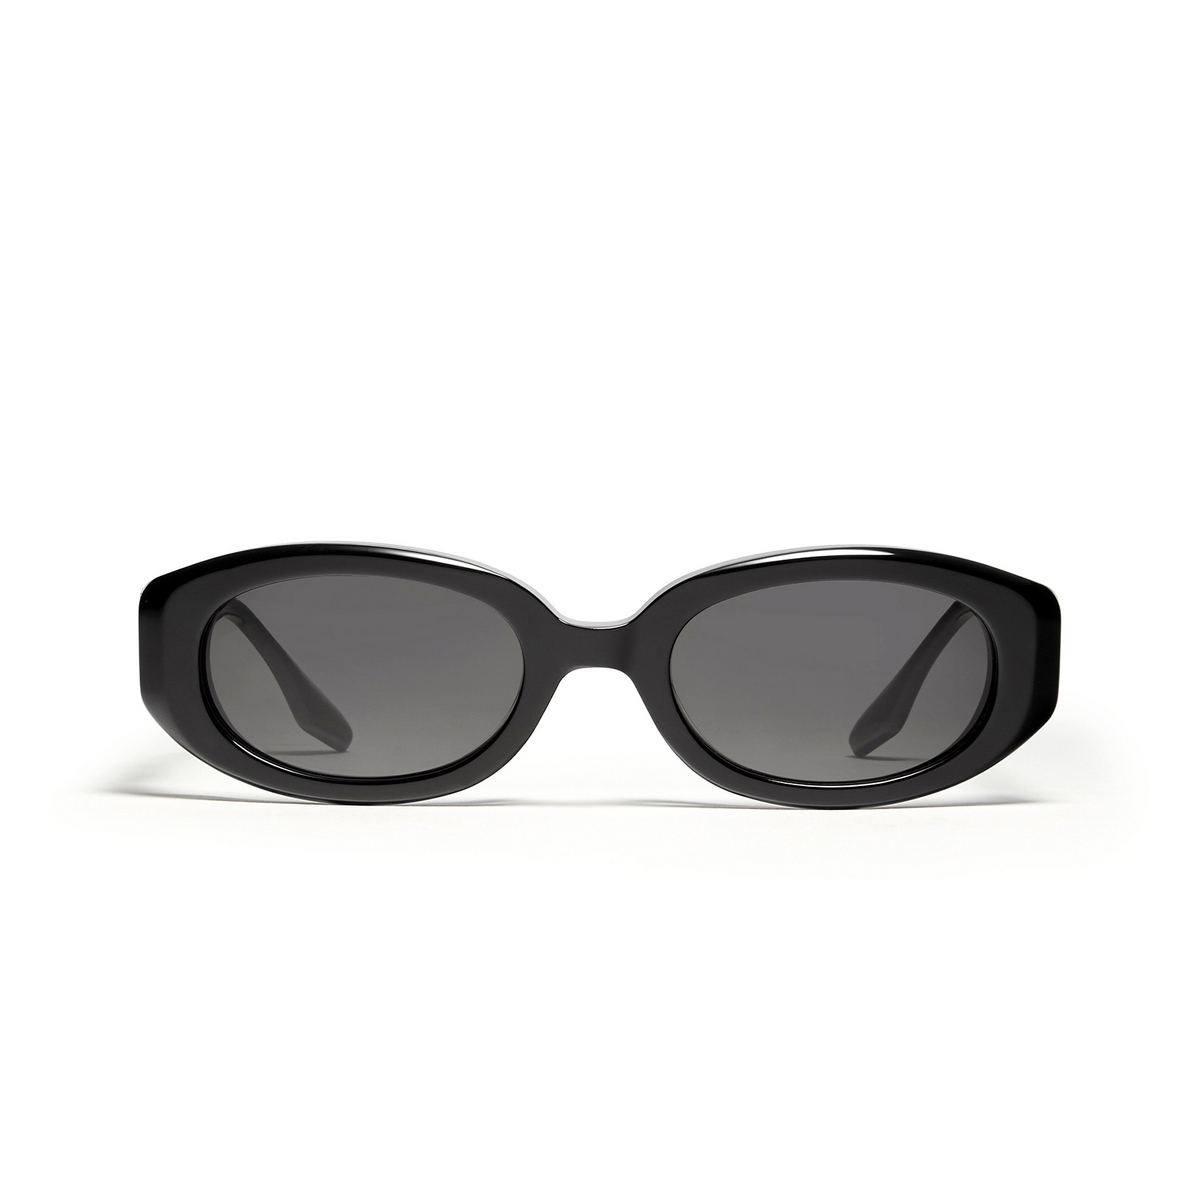 Gentle Monster® Oval Sunglasses: Oto color Black 01 - front view.